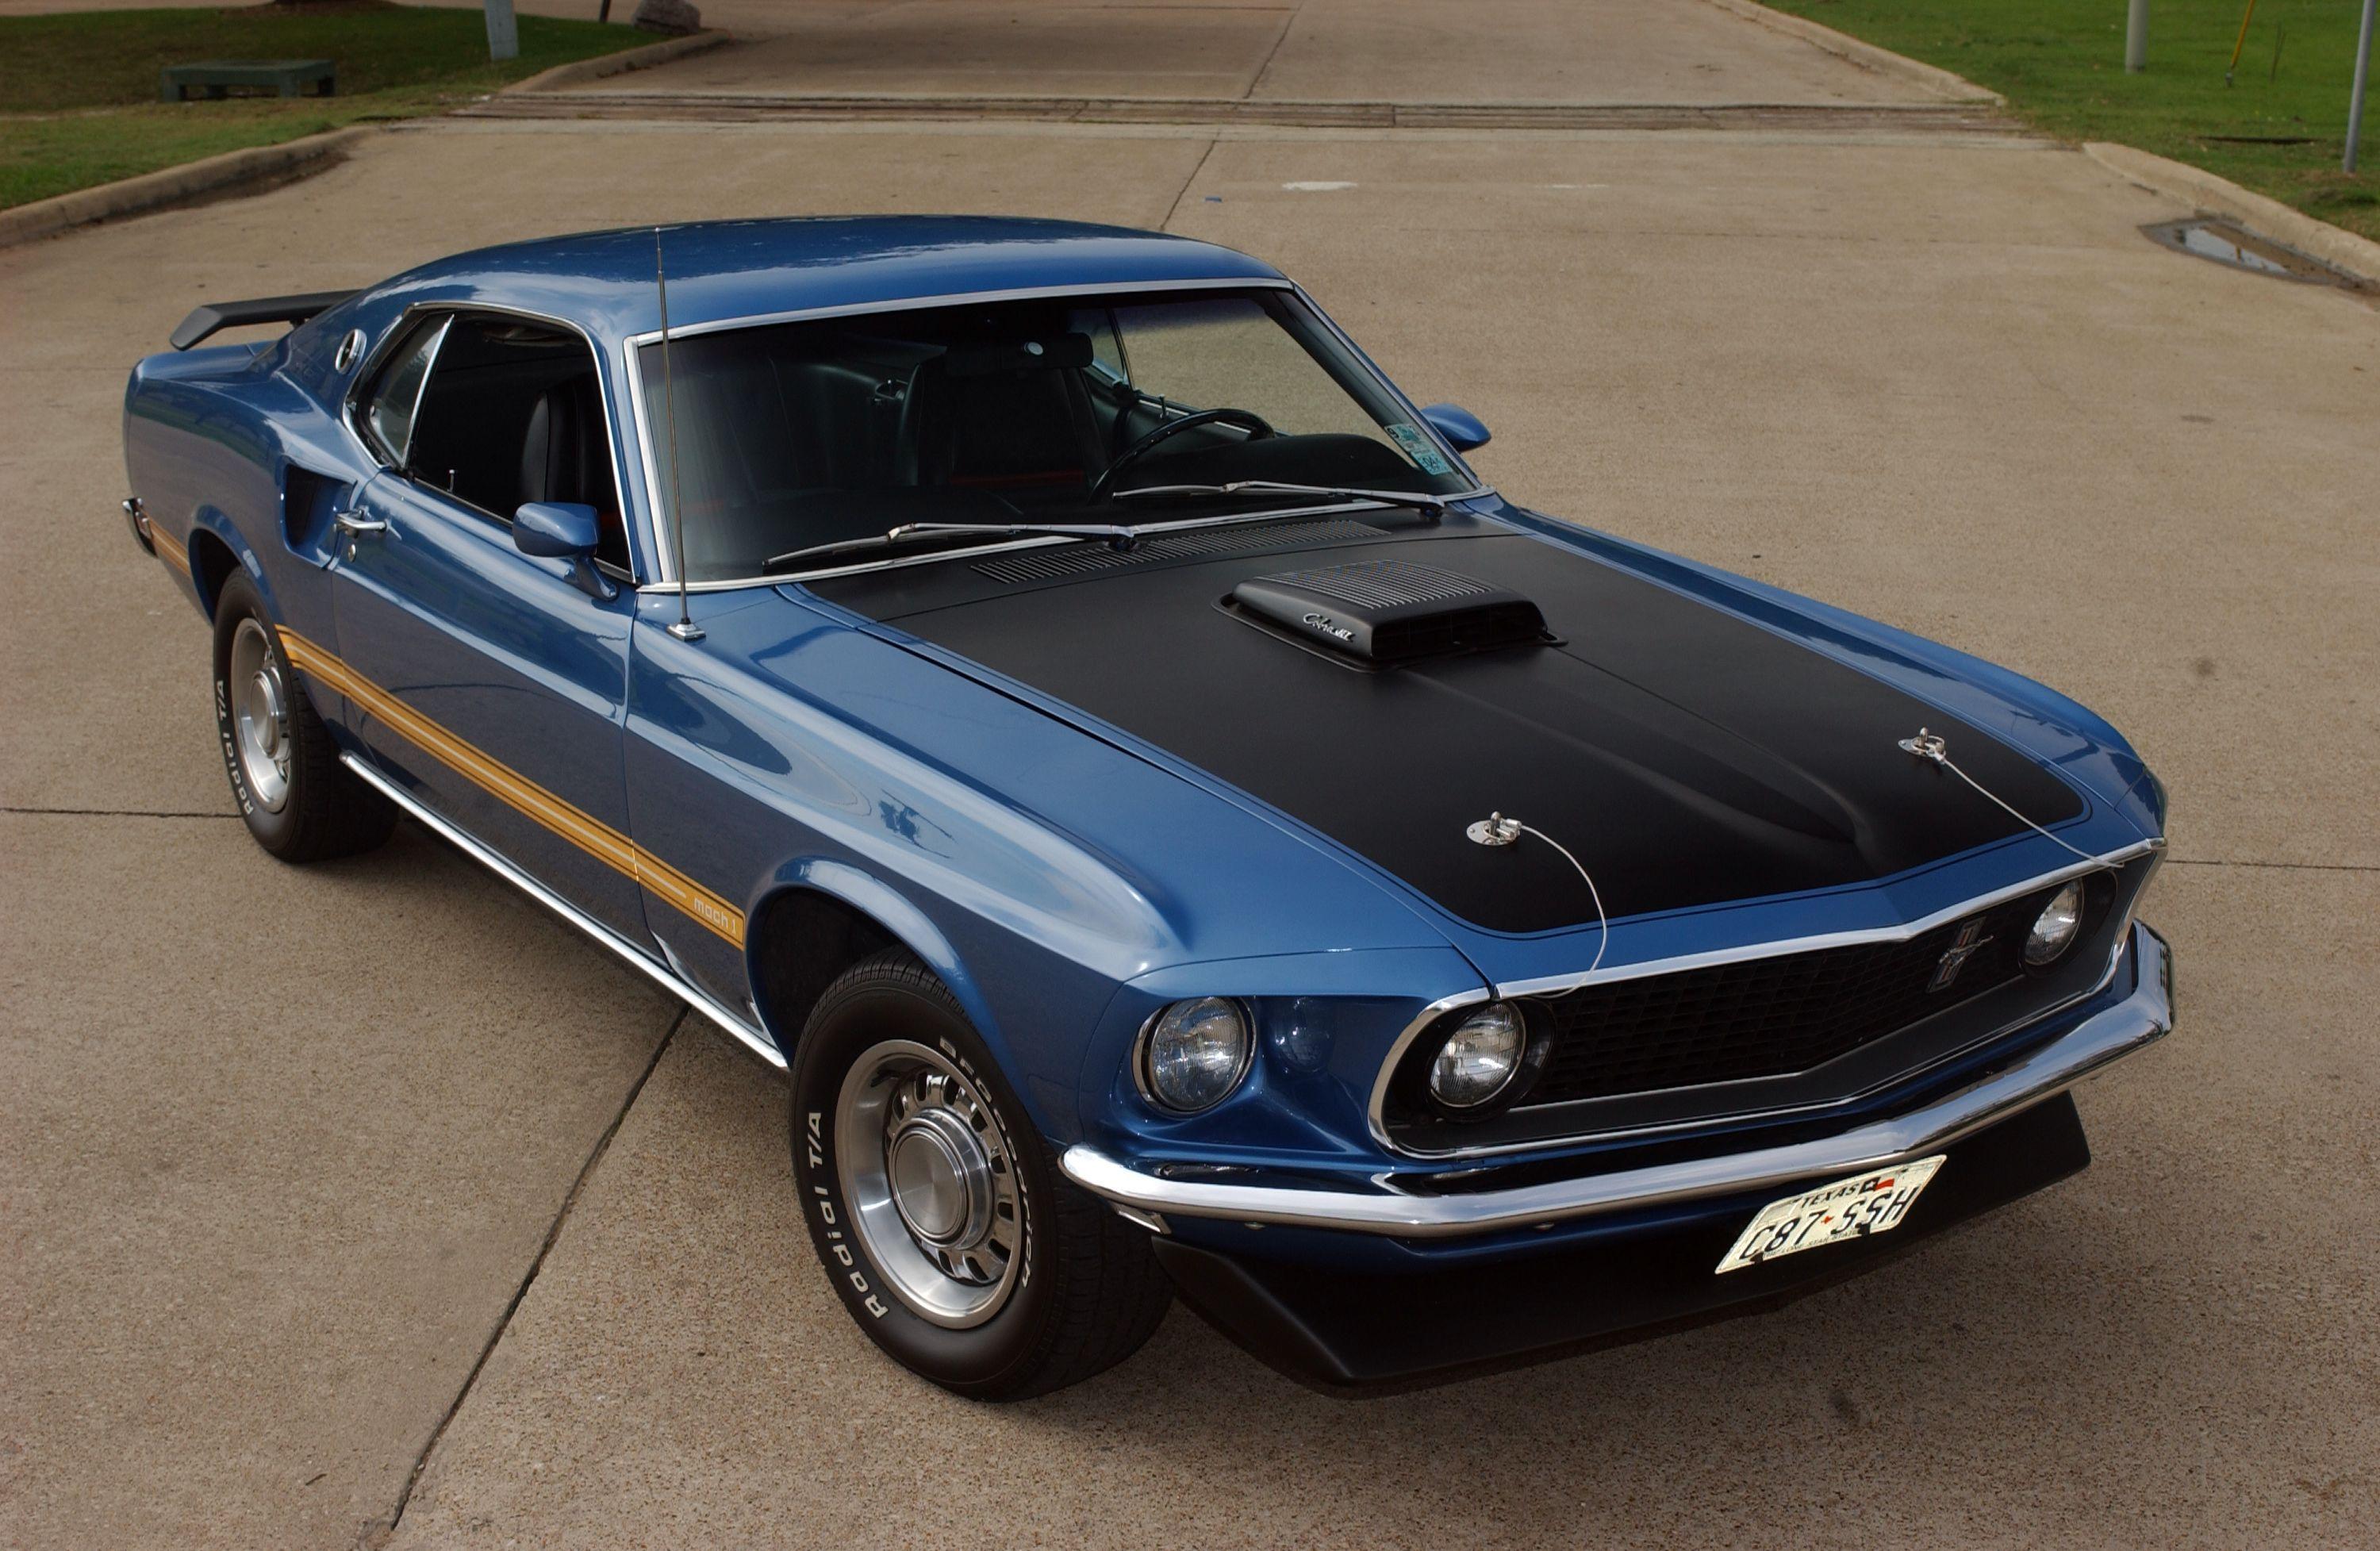 Muscle Cars Vehicles Ford Mustang 1969 Mach 1 427 69 Wallpaper